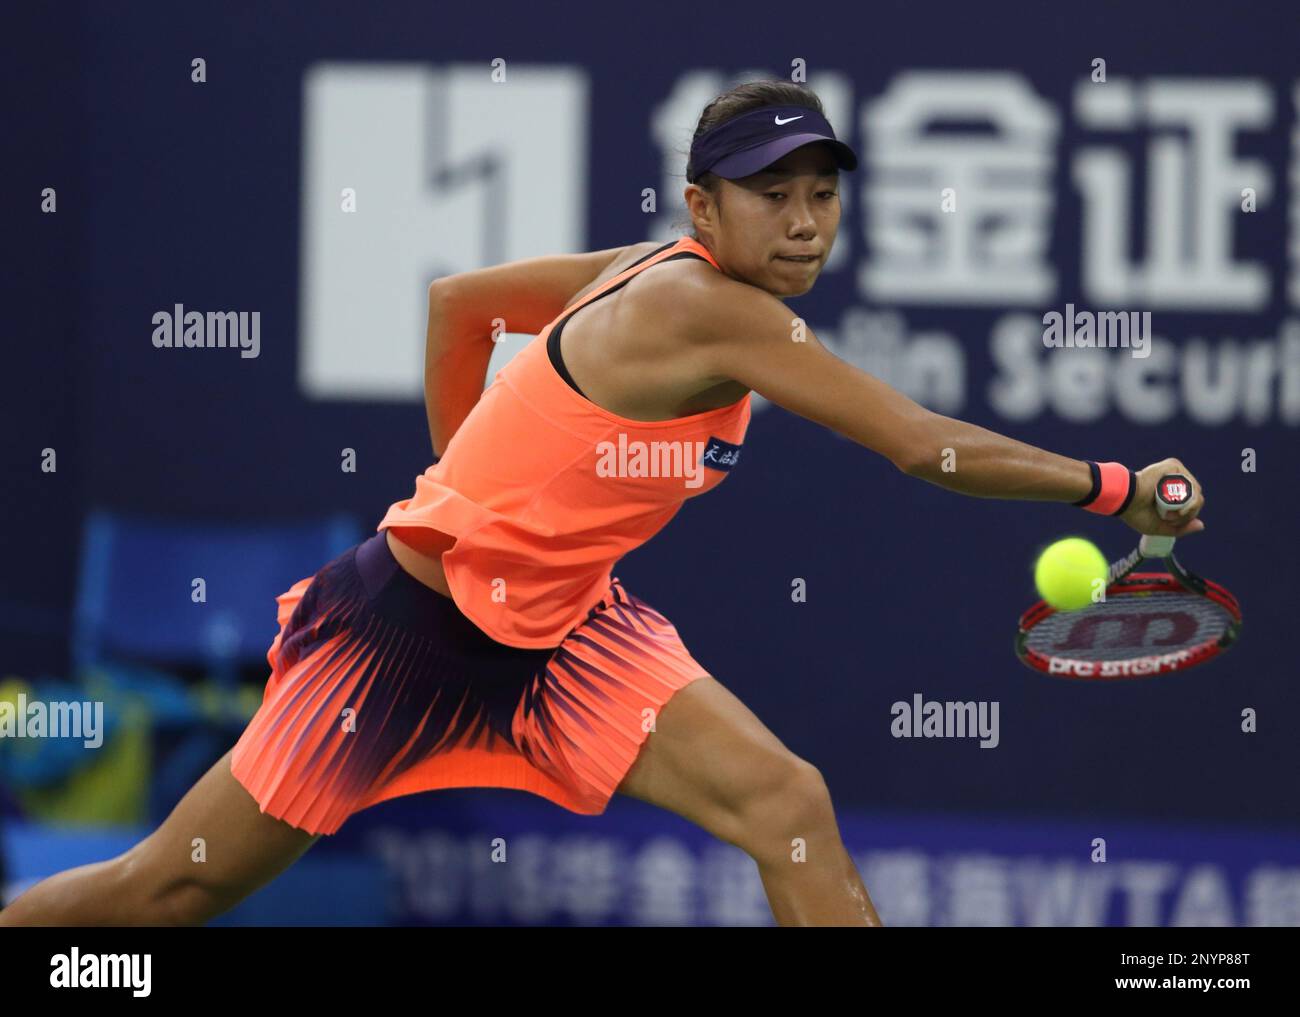 streaming the us open tennis